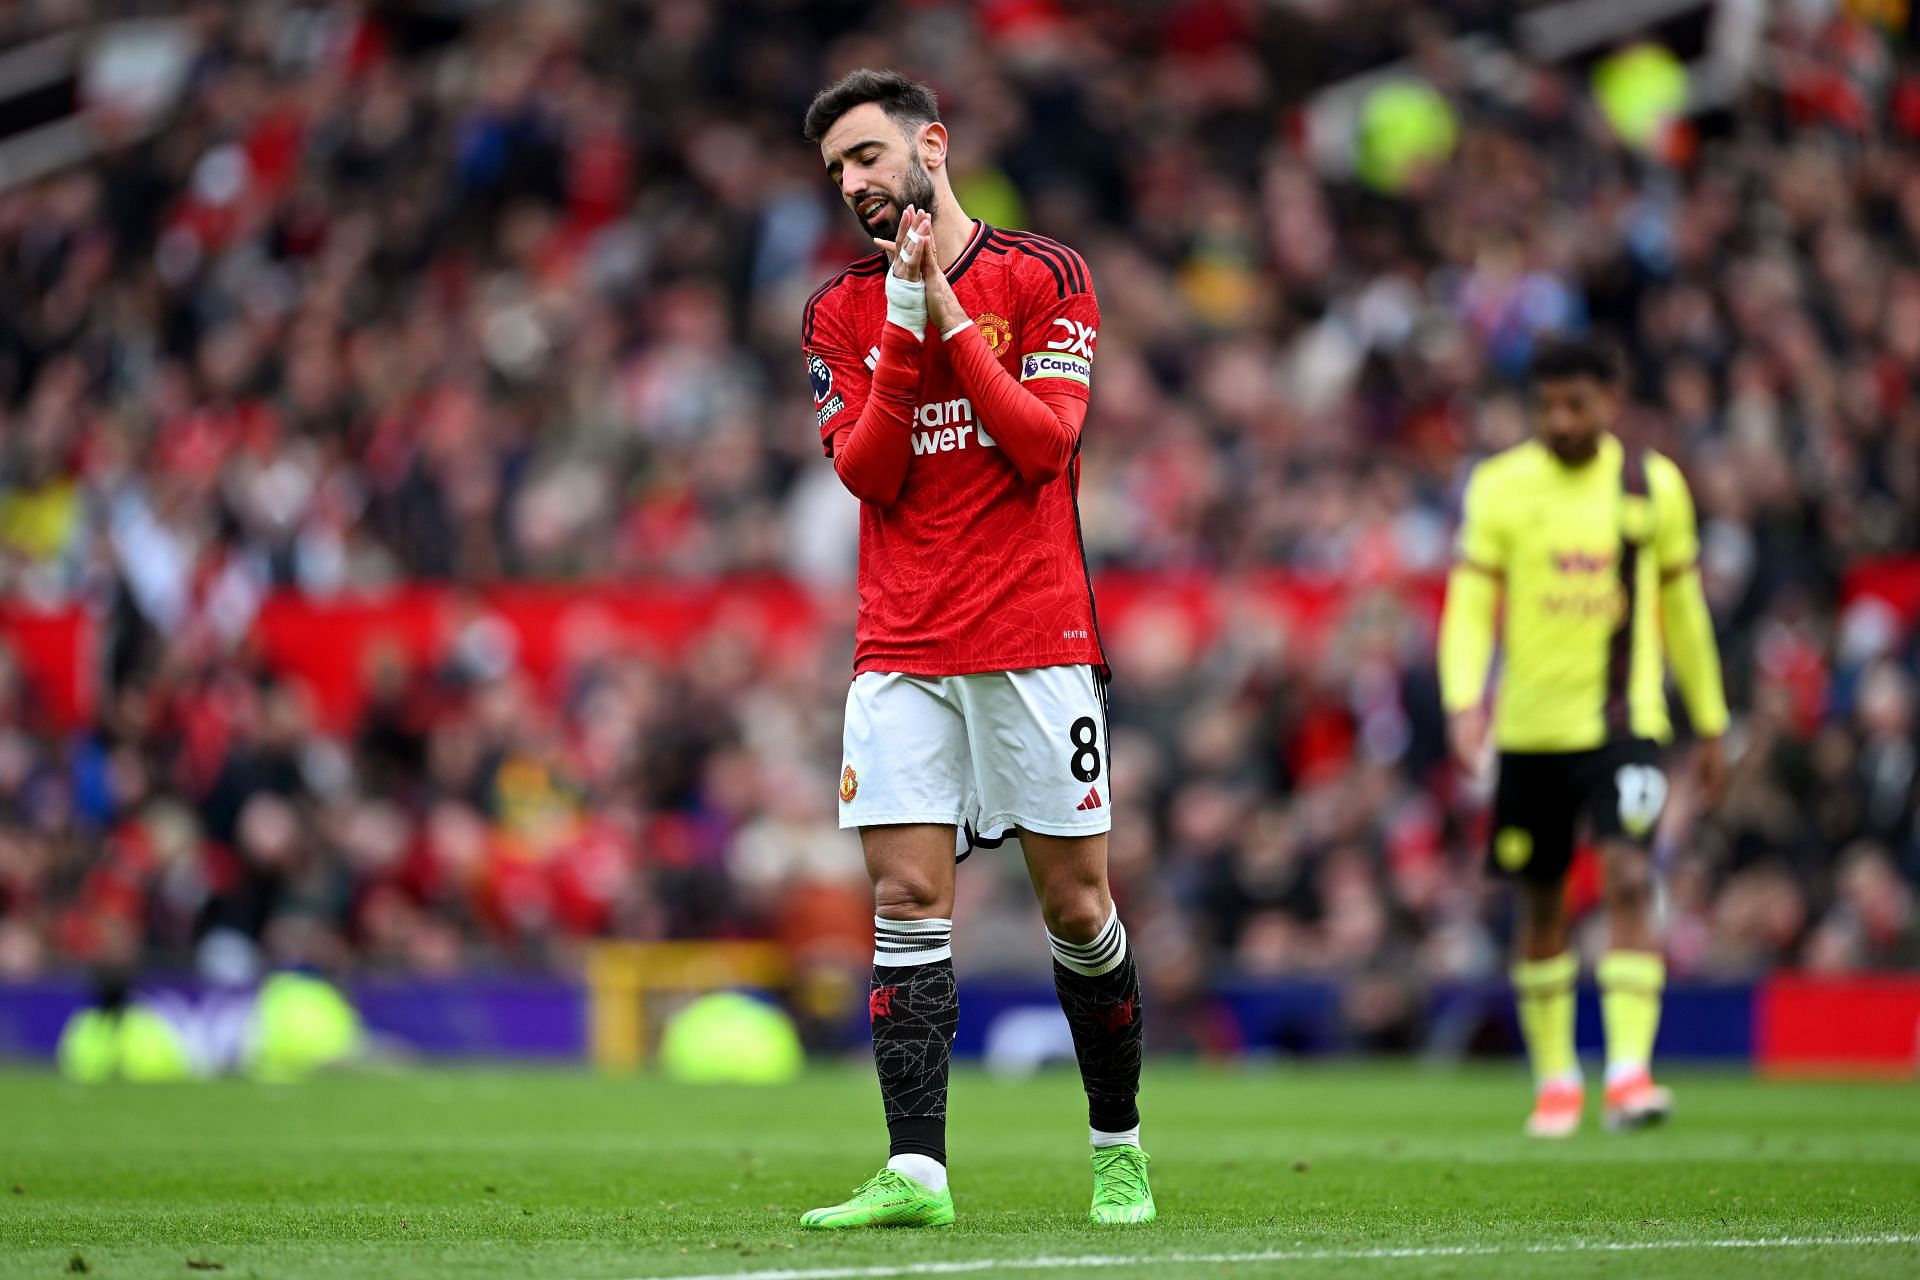 Bruno Fernandes has been indispensable at Old Trafford since his arrival